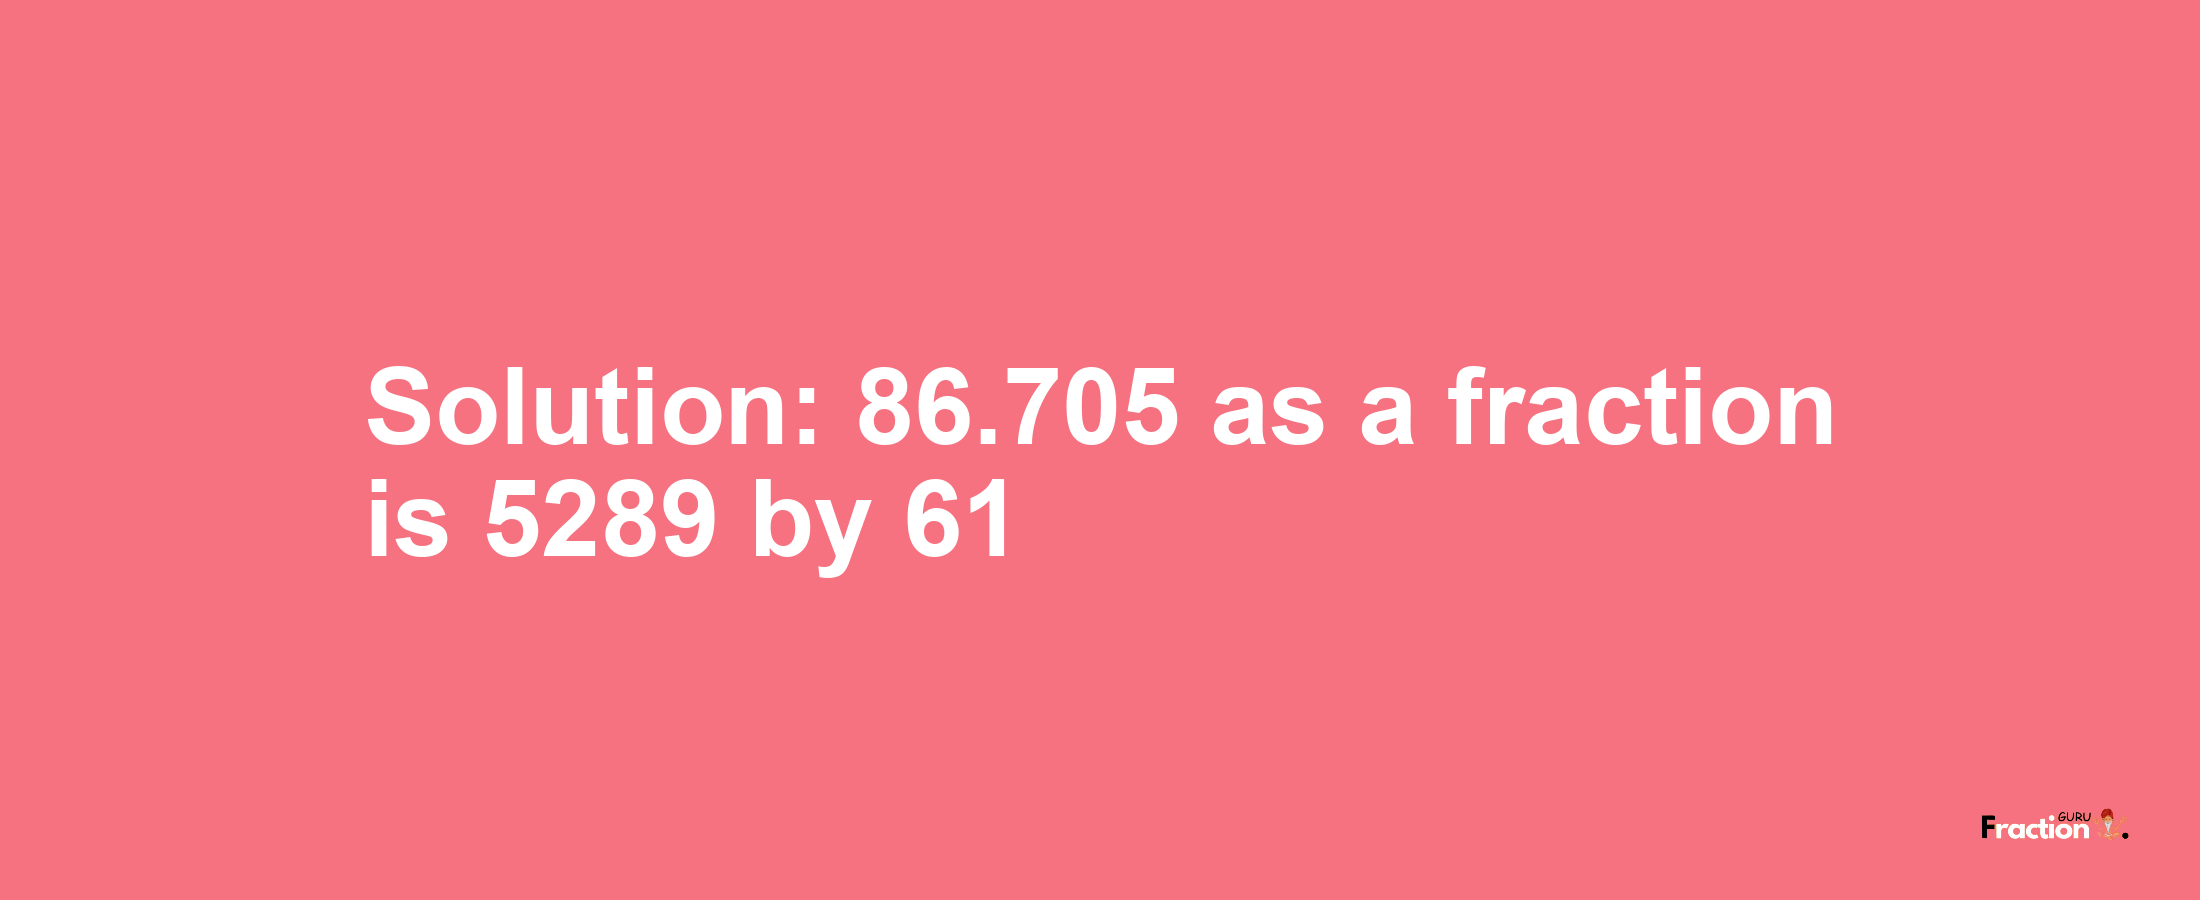 Solution:86.705 as a fraction is 5289/61